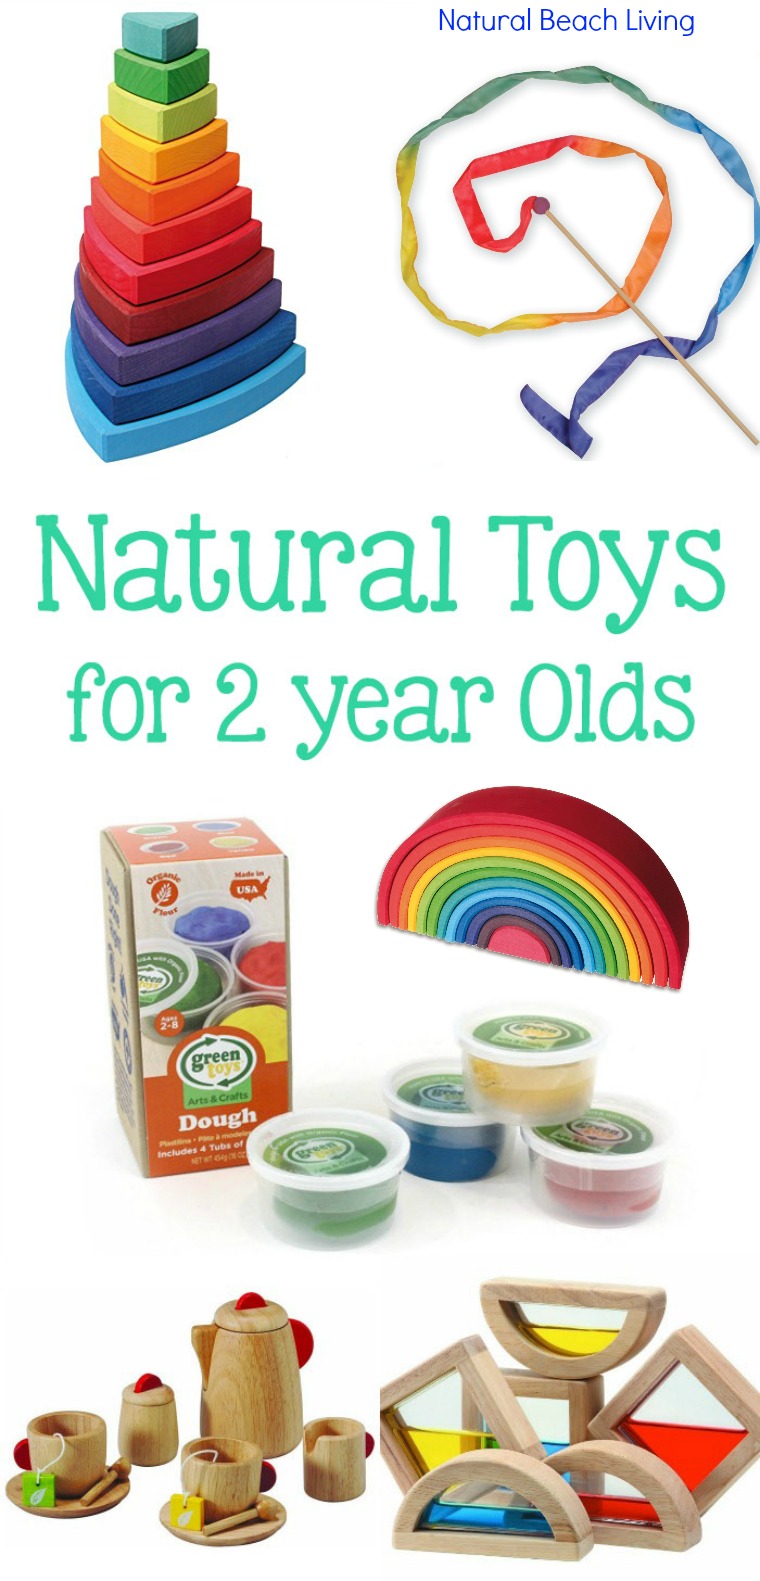 32+ Educational Toys for 2 Year Olds, Best Educational Toys for 2 Year Olds inspire creativity, work on child development skills, logic, imagination and more. Toys for Toddlers and Preschoolers, Toddler books, These toddler toys inspire children